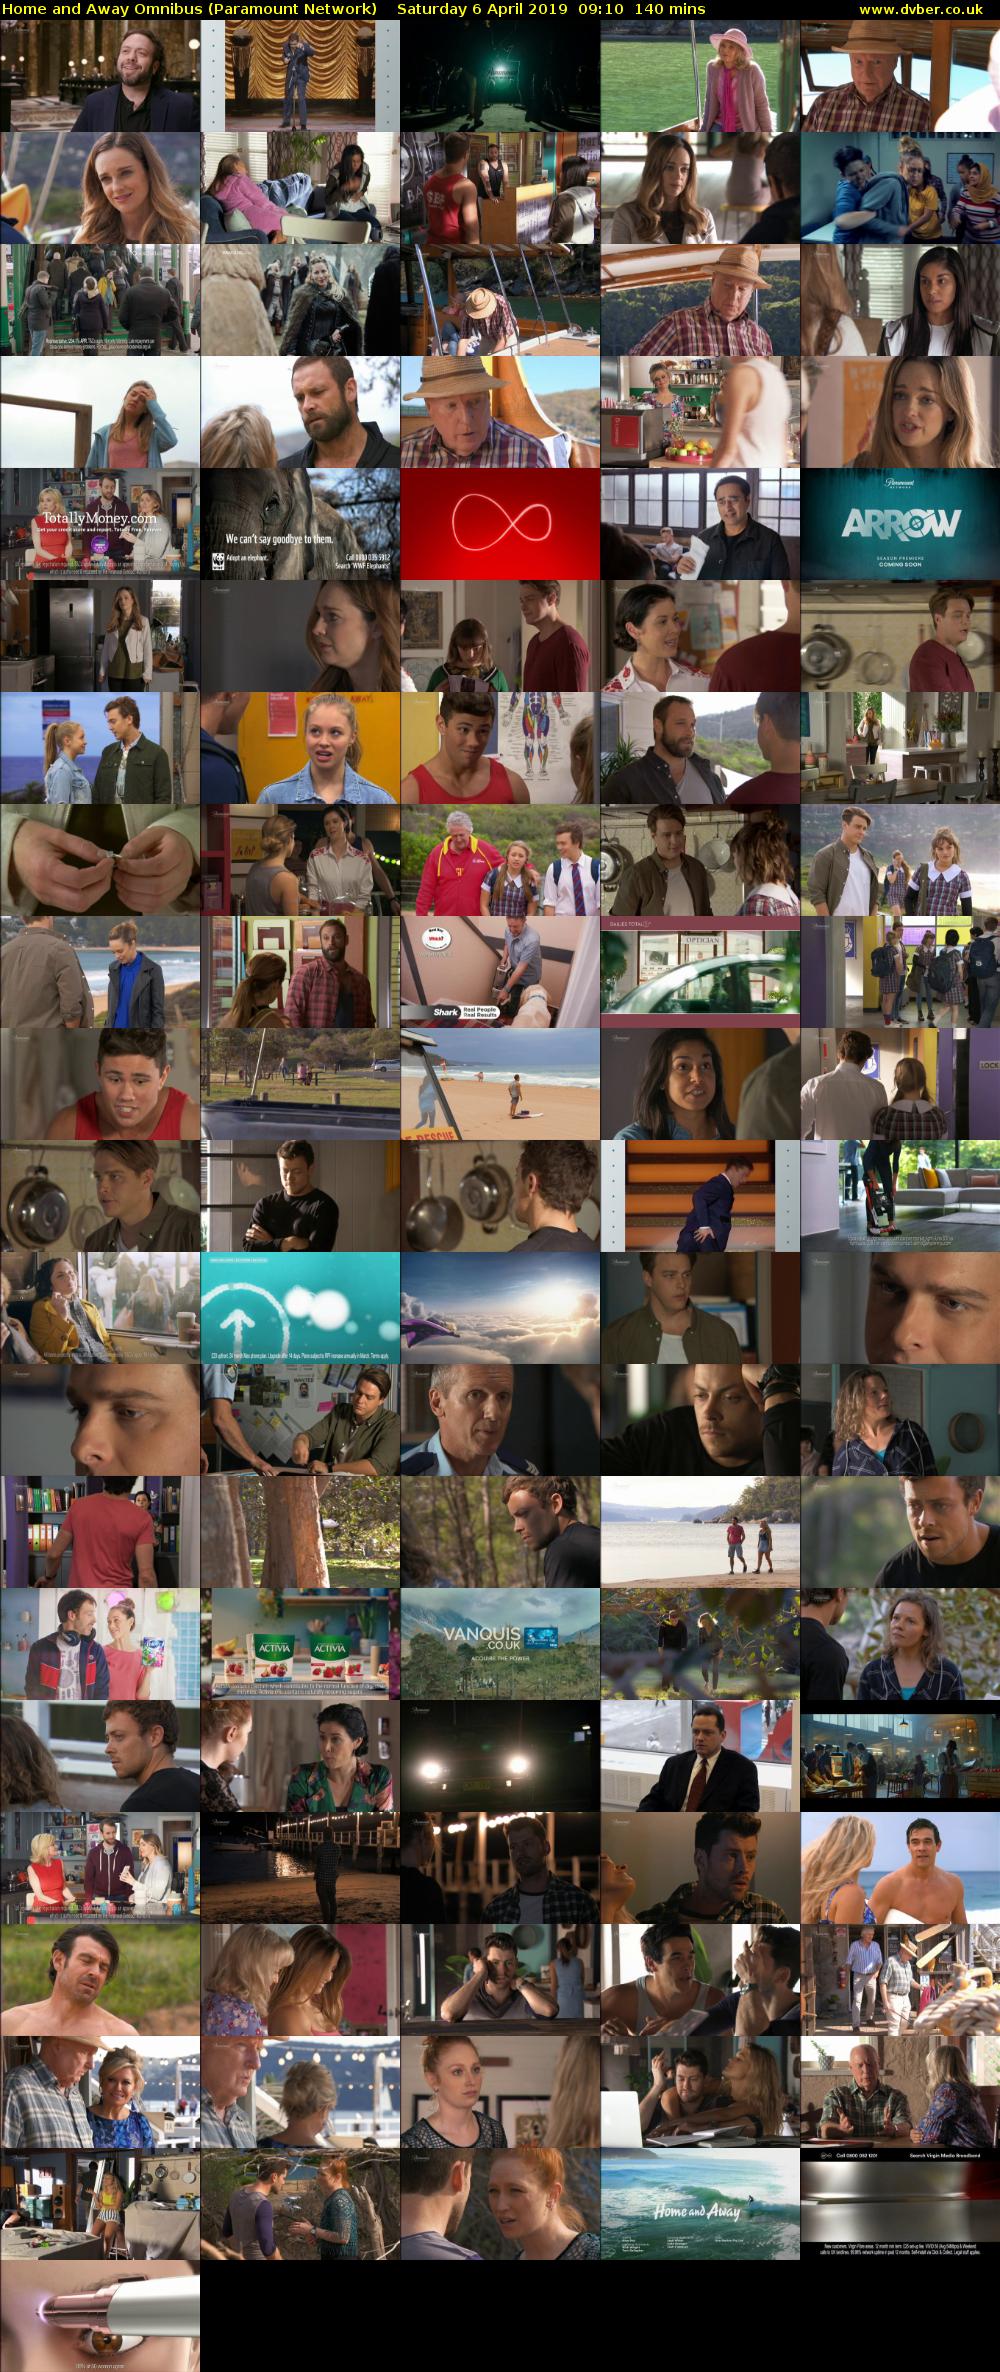 Home and Away Omnibus (Paramount Network) Saturday 6 April 2019 09:10 - 11:30